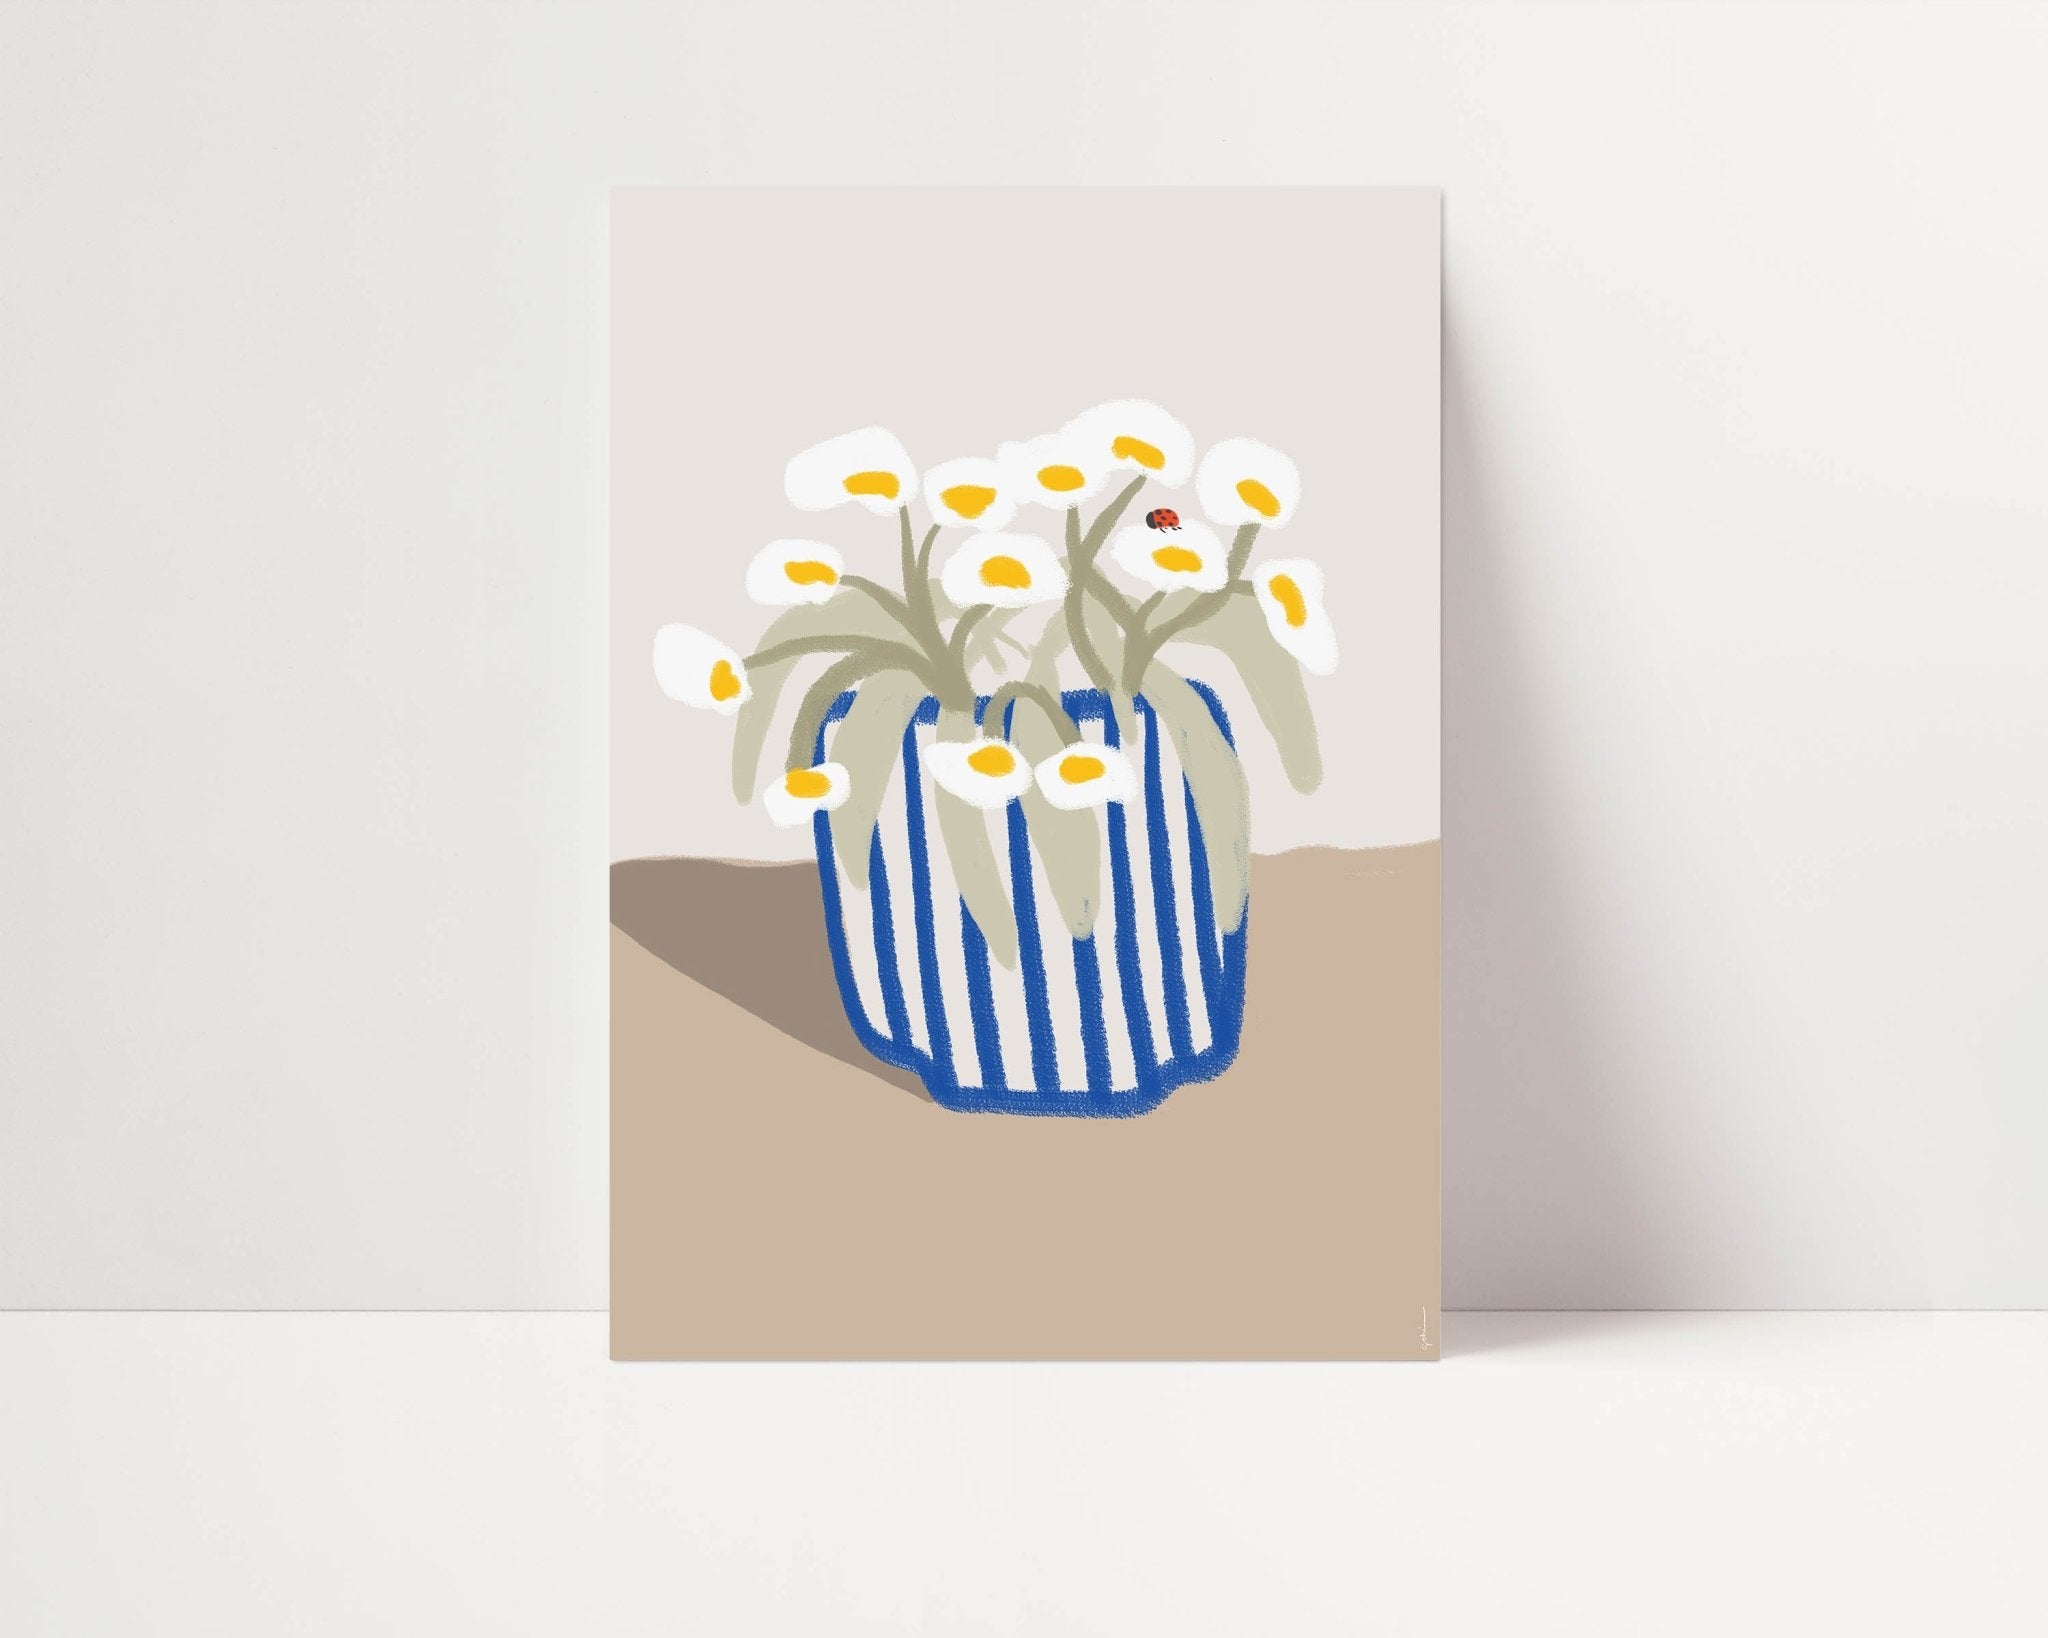 Daisy Vase Poster - D'Luxe Prints